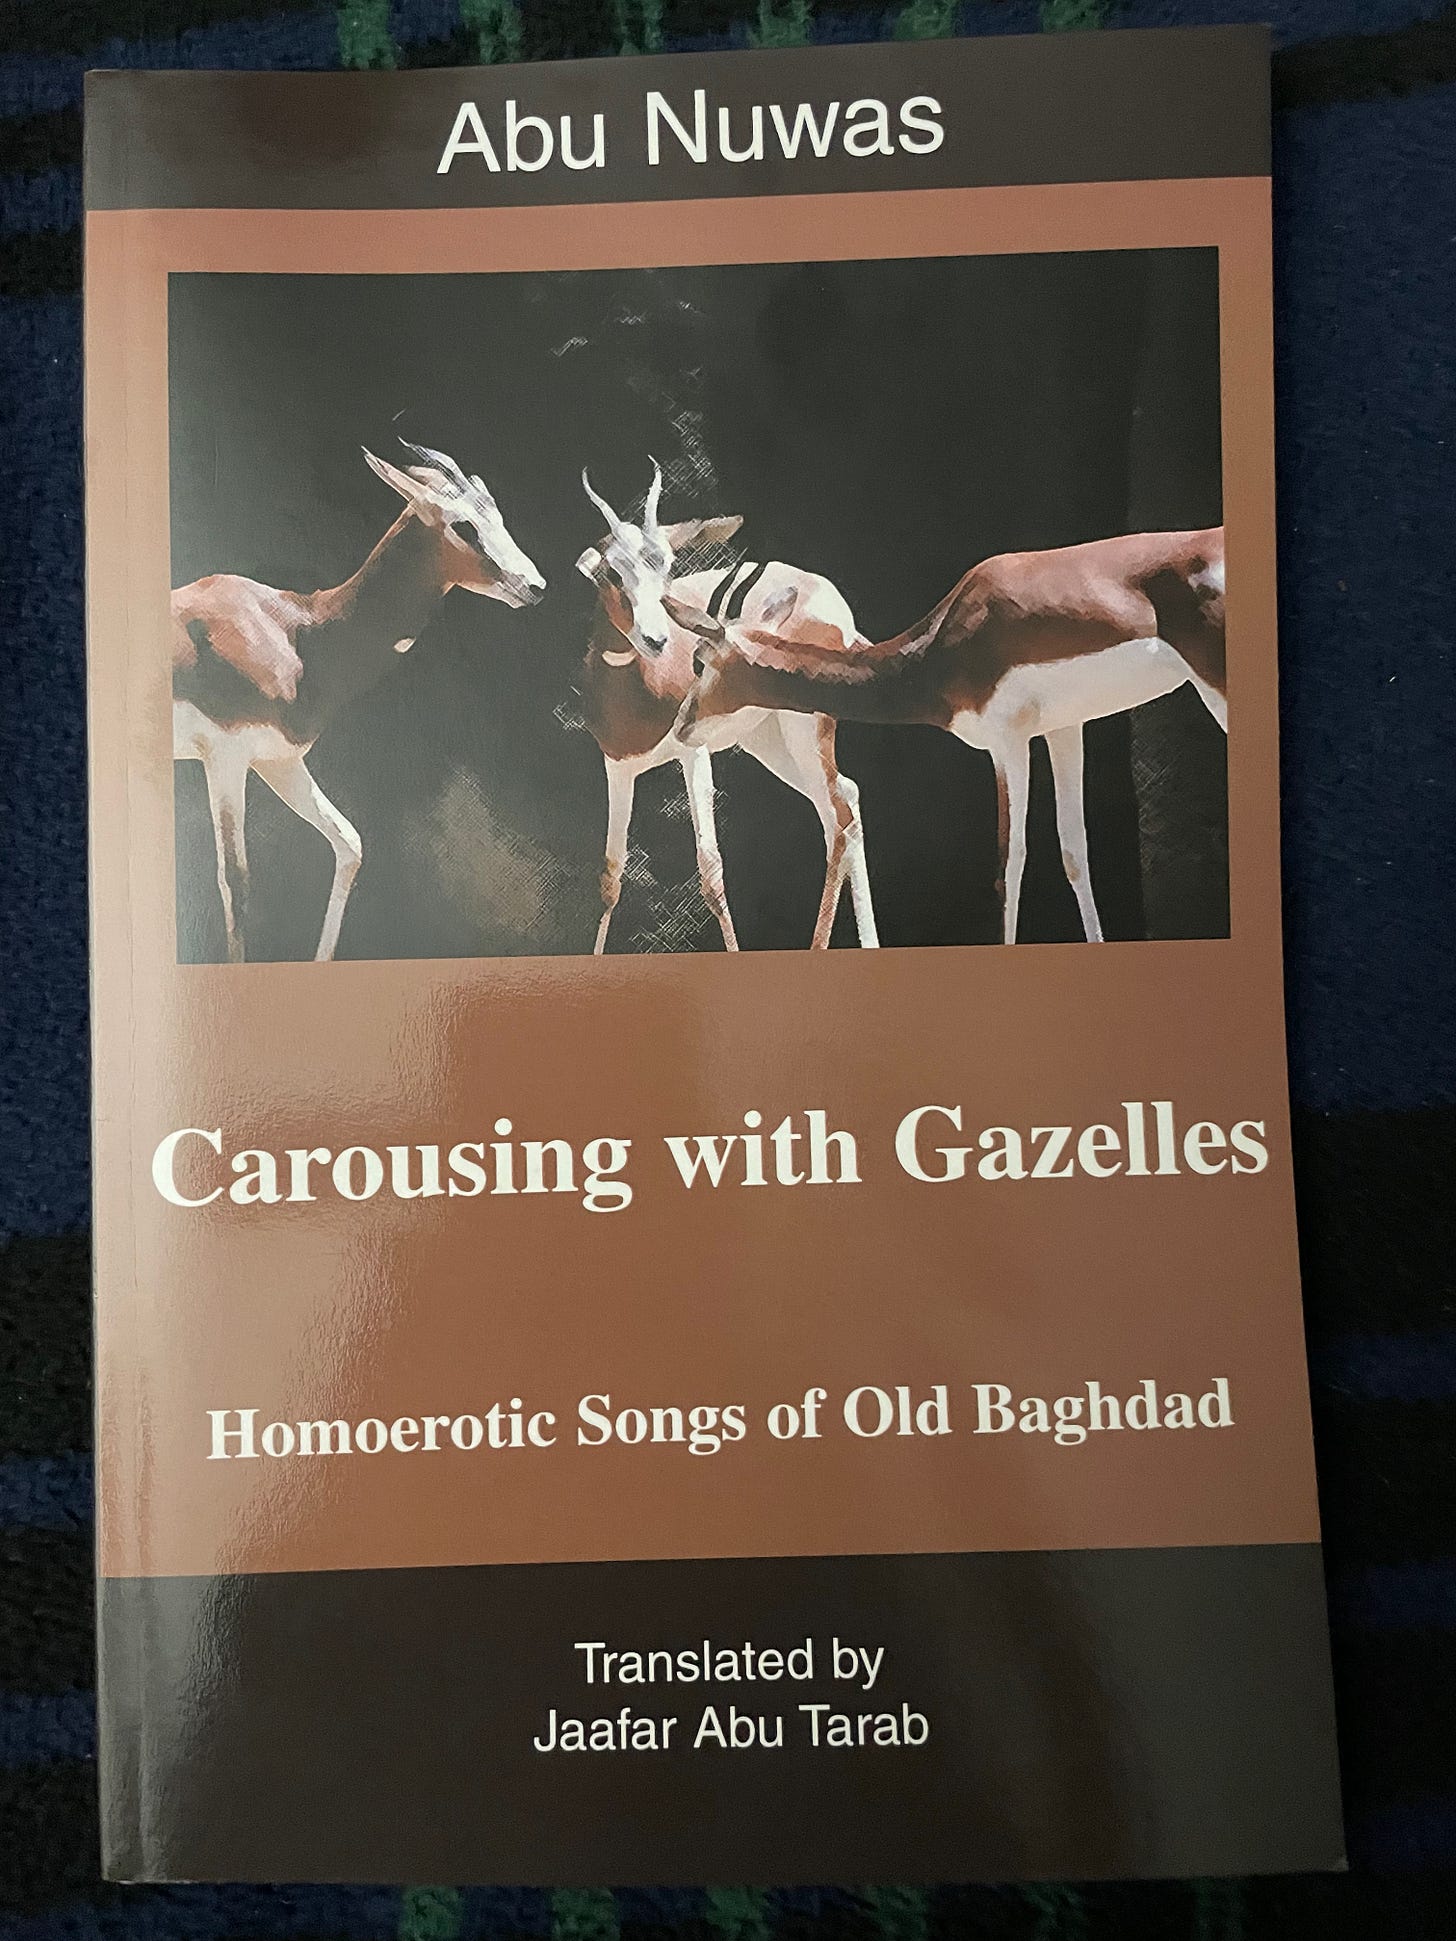 Photo of the cover of the book Carousing with Gazelles: Homoerotic Songs of Old Baghdad, by Abu Nuwas, translated by Jaafar Abu Tarab